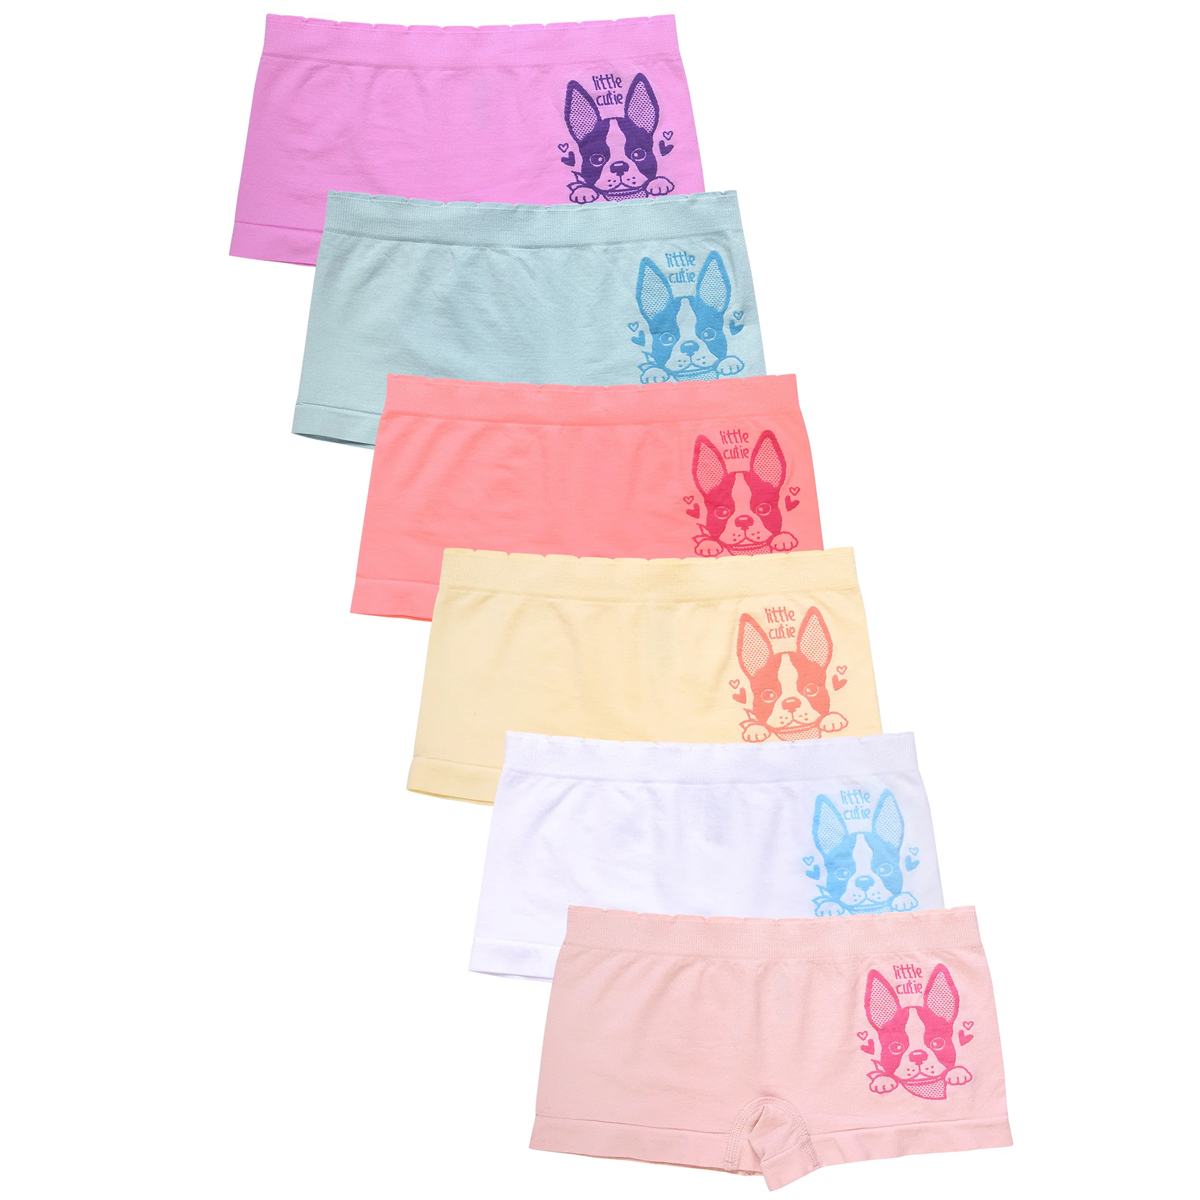 Girls' Panties - Size 2T-3T, 5 Pack